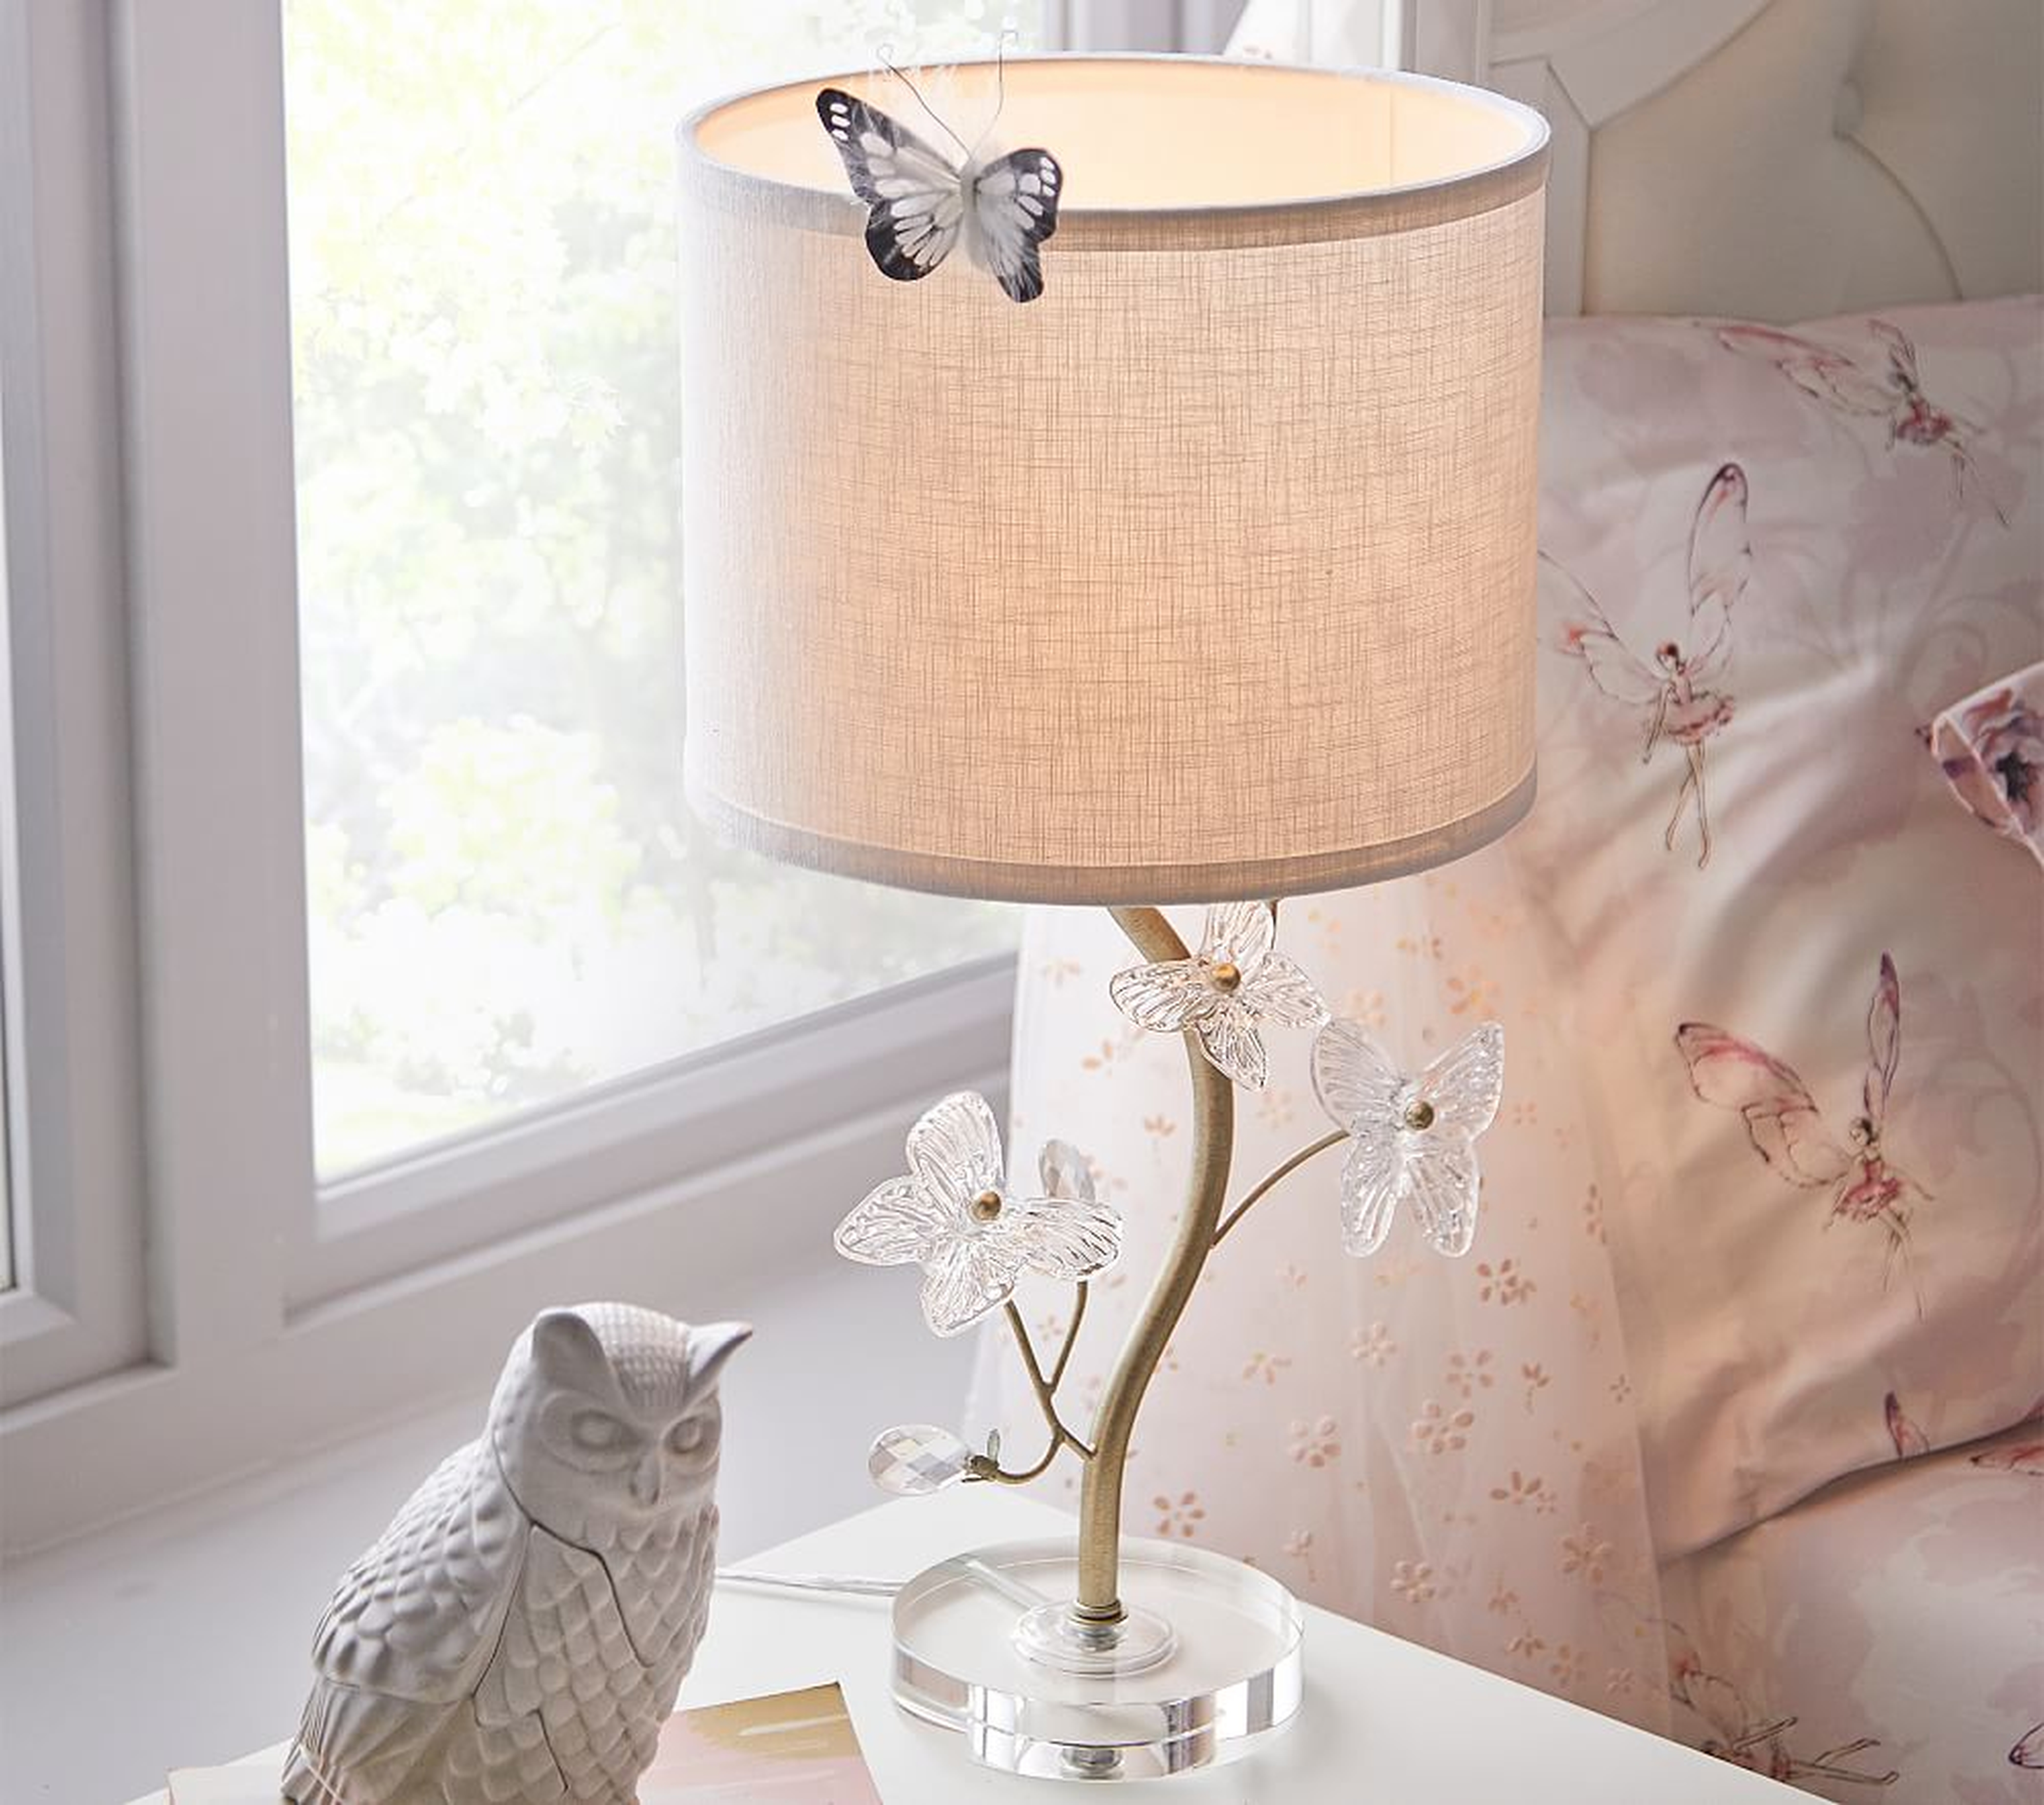 Monique Lhuillier Crystal Butterfly Table Lamp, Champagne - Pottery Barn Kids